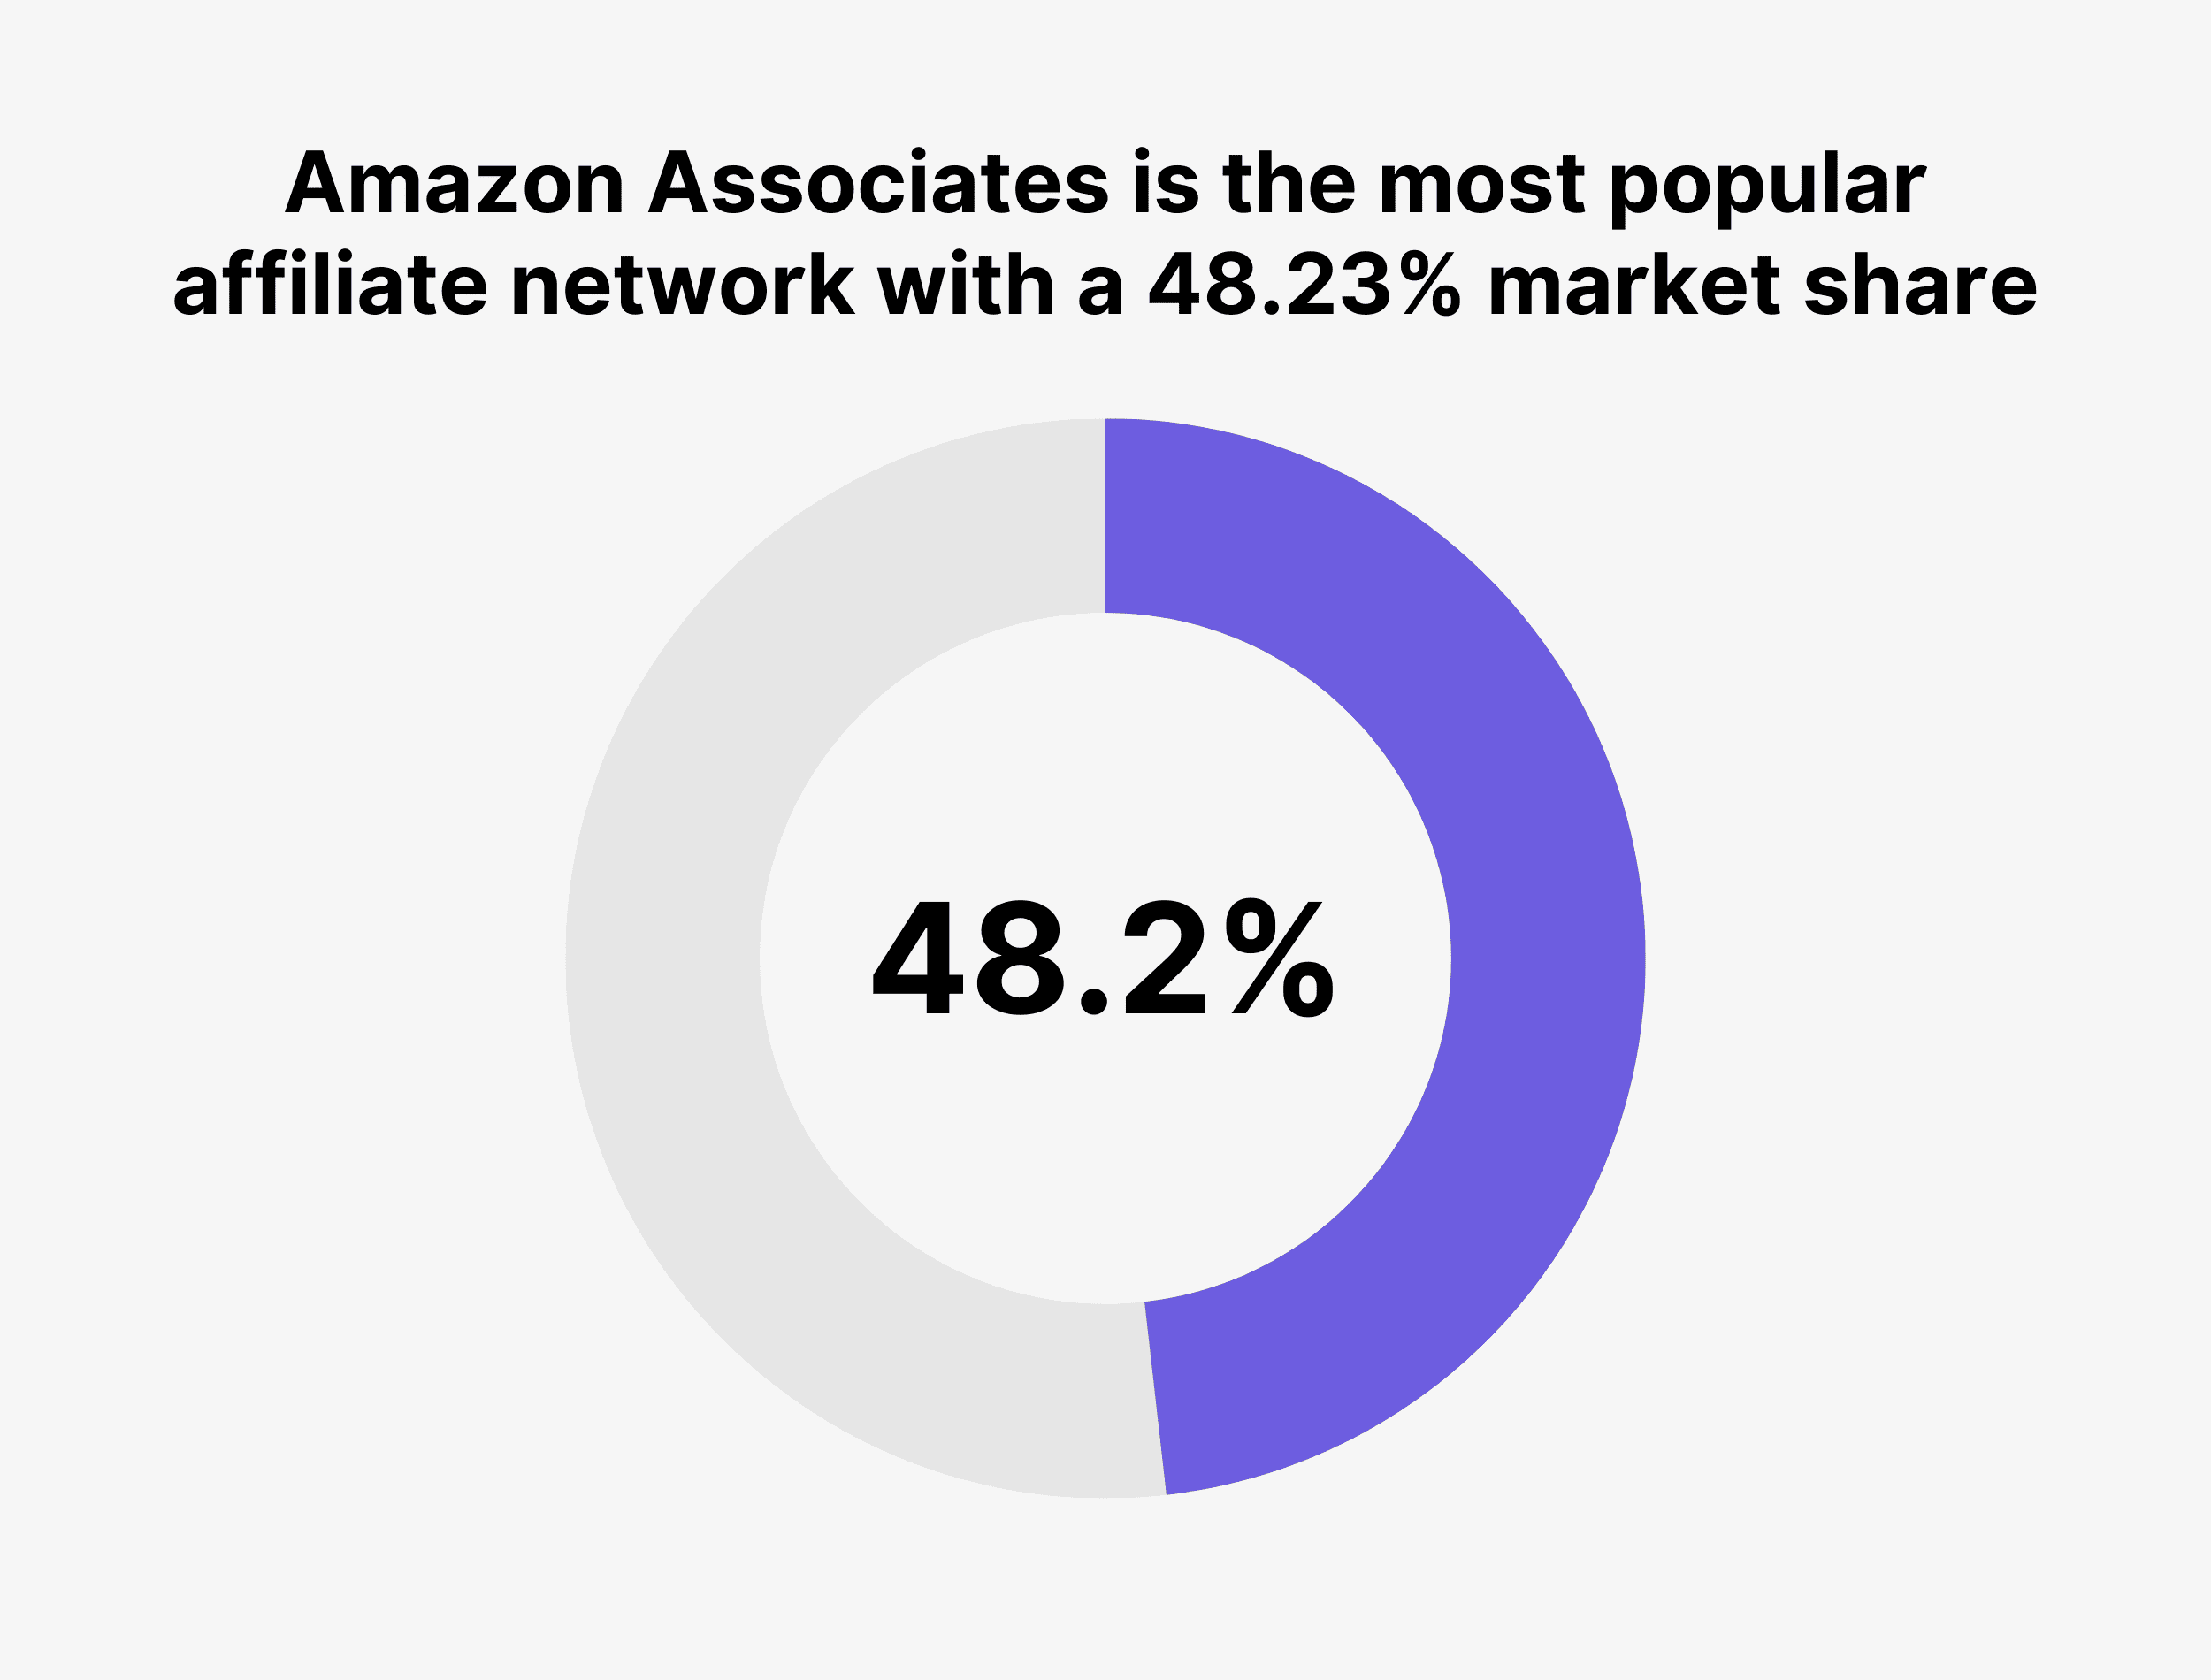 Amazon Associates is the most popular affiliate network with a 48.23% market share